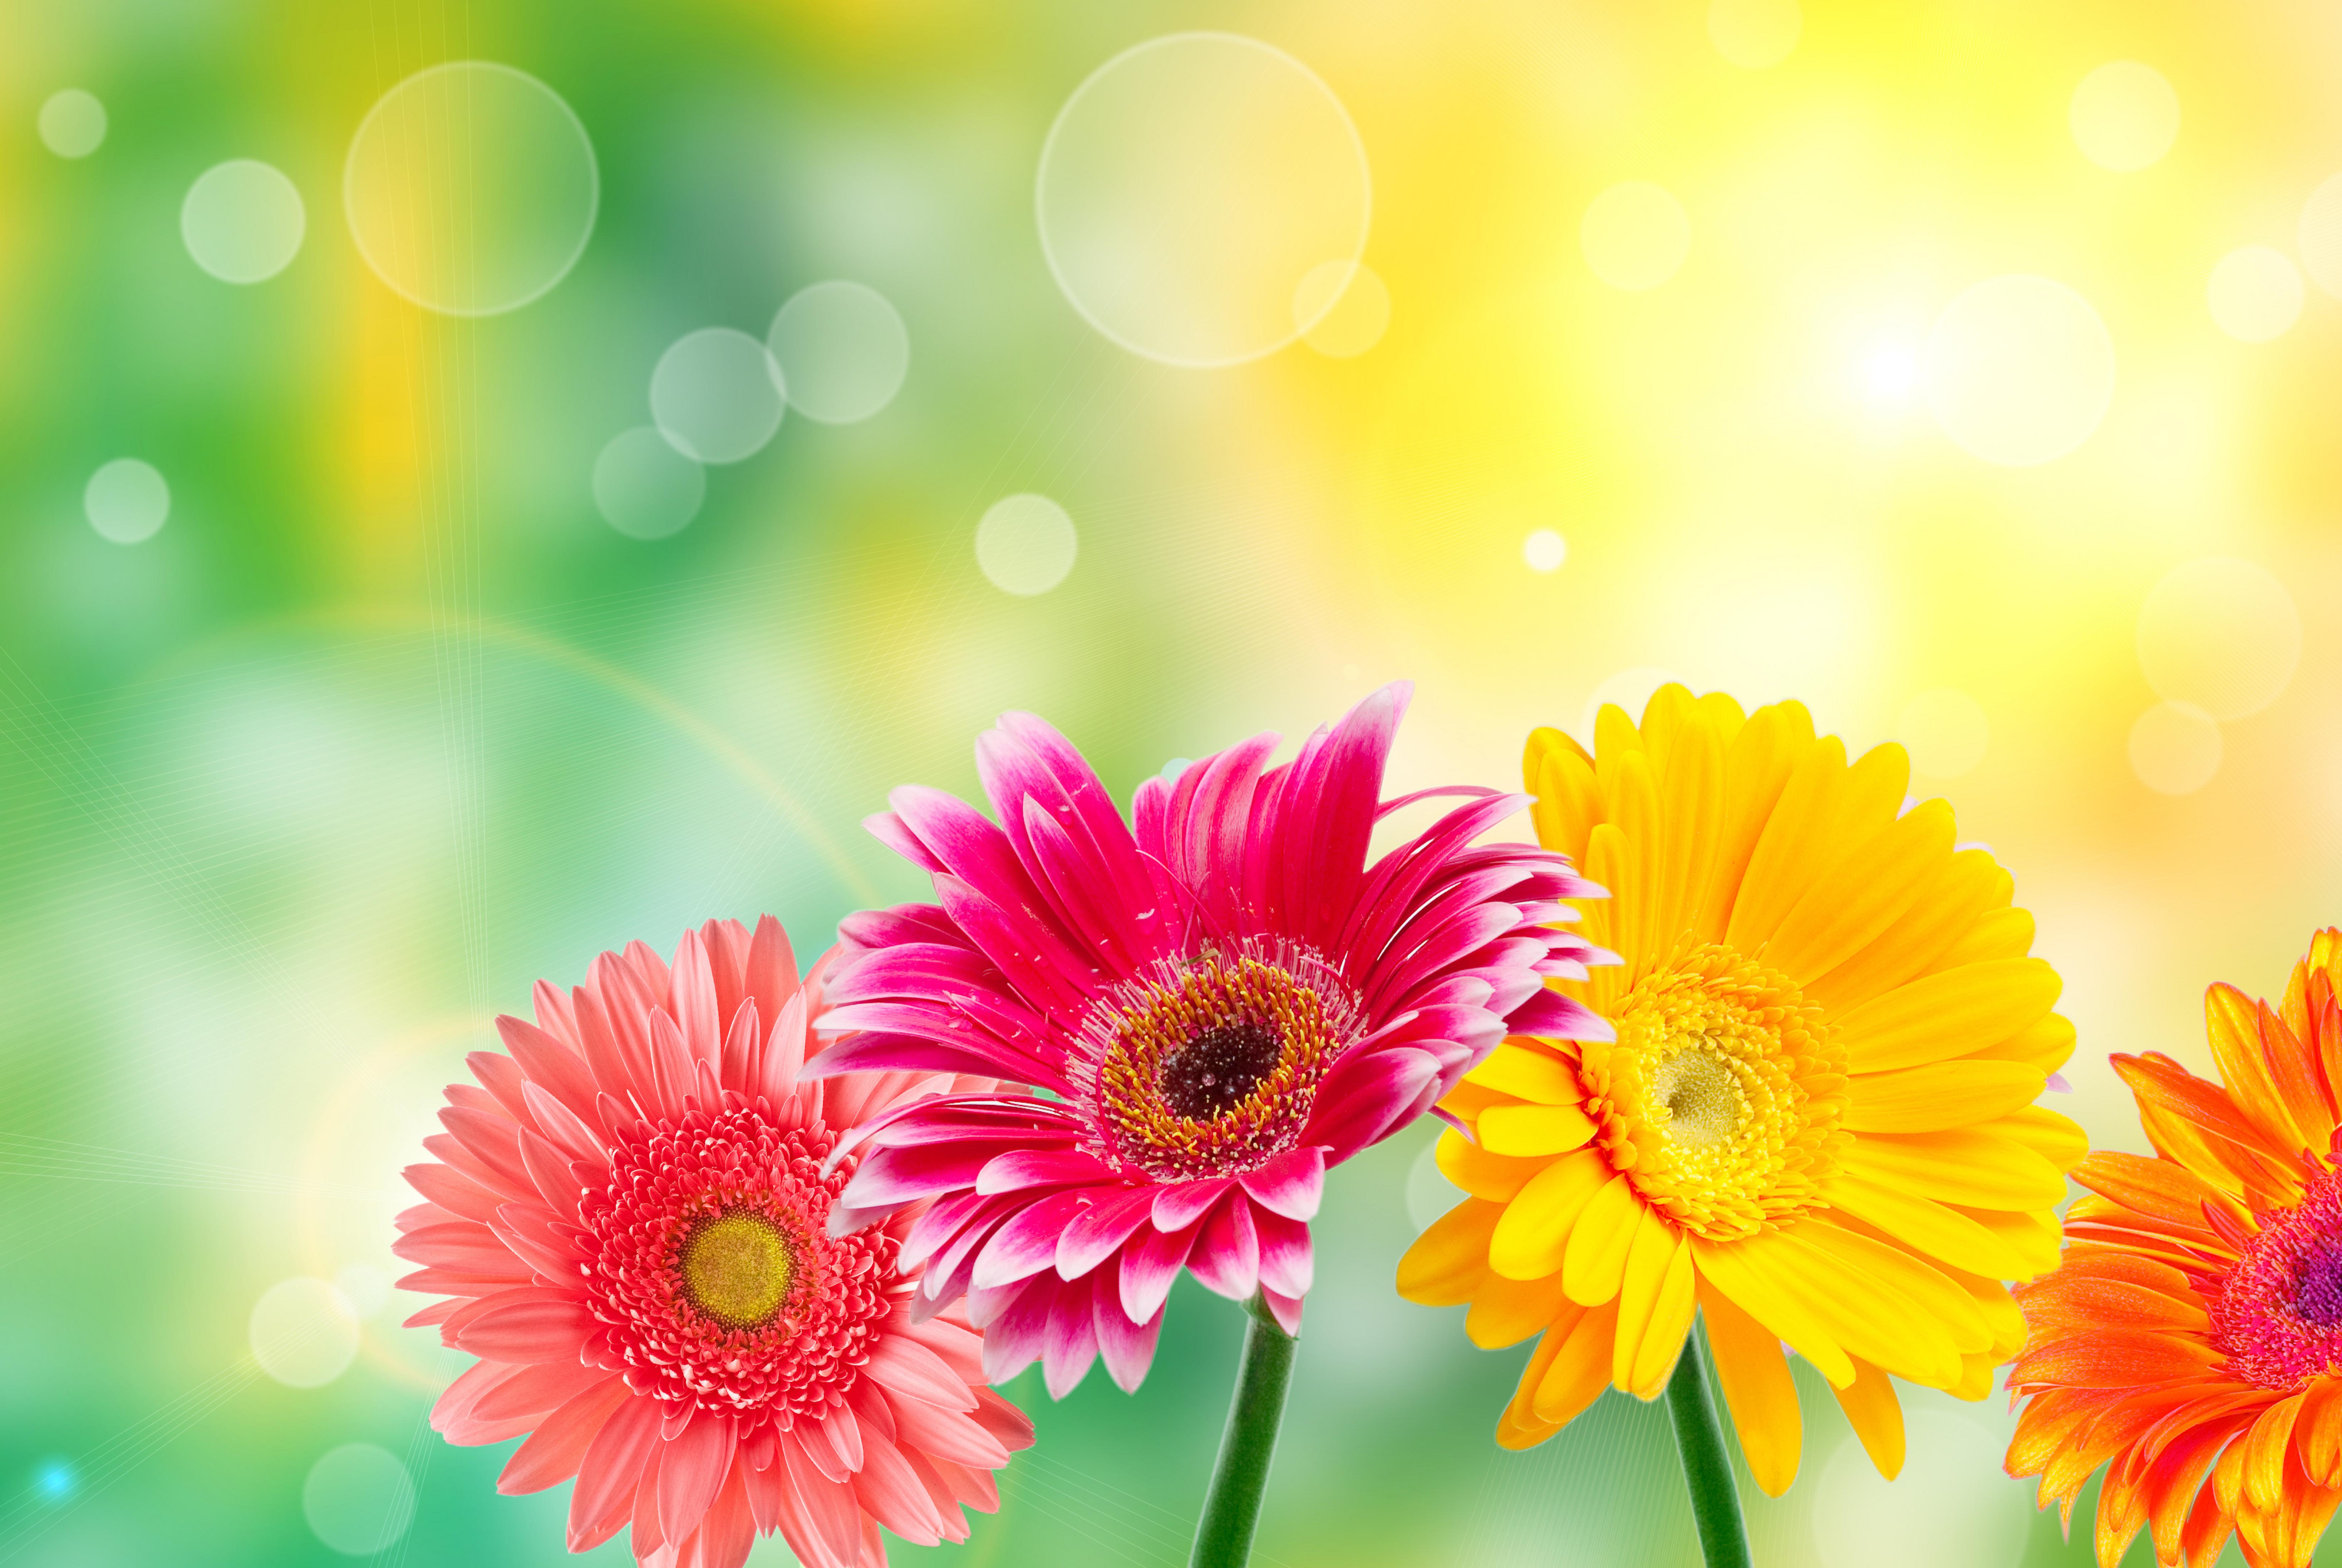 Quality Flower images Wallpapers, Wallpapers